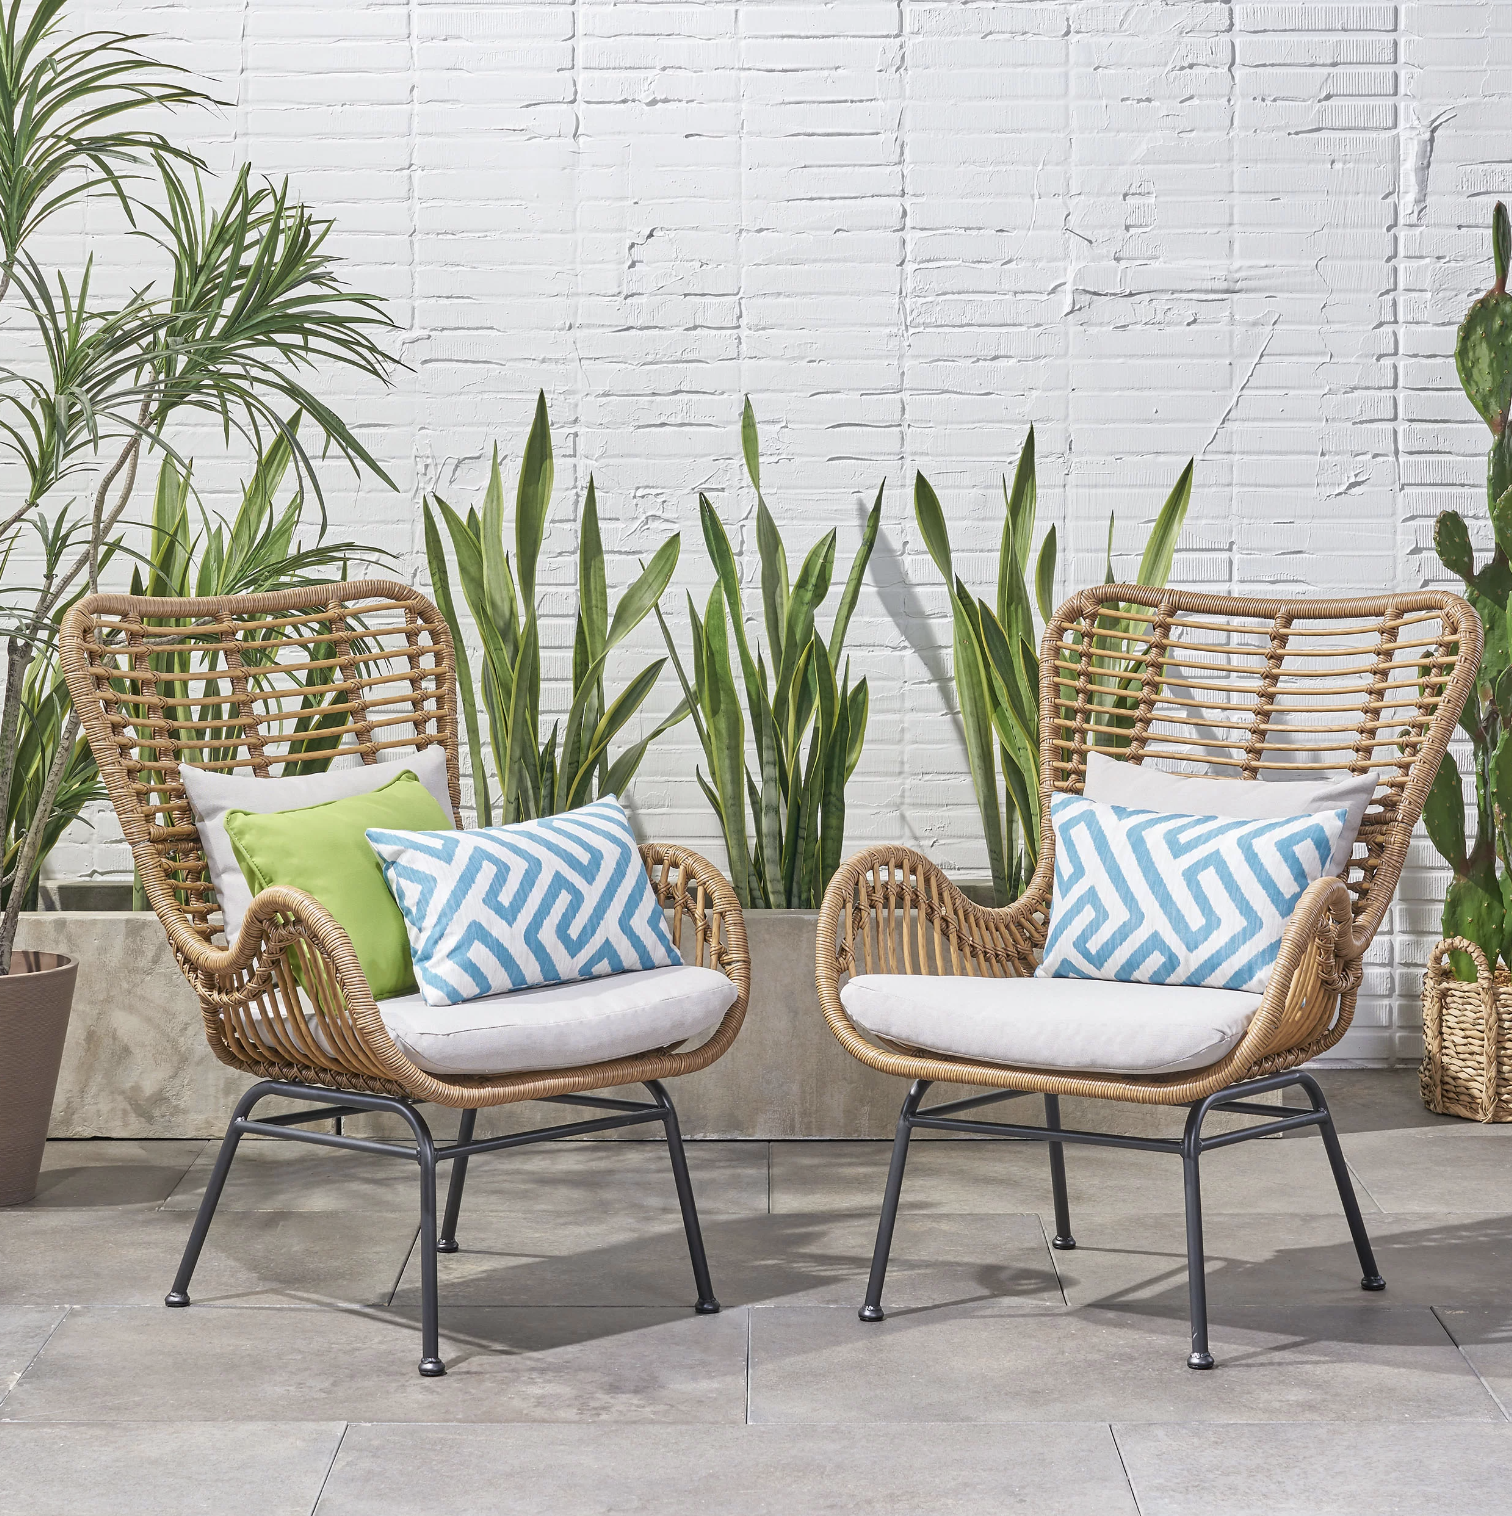 The two chairs on a tiled patio in front of plants